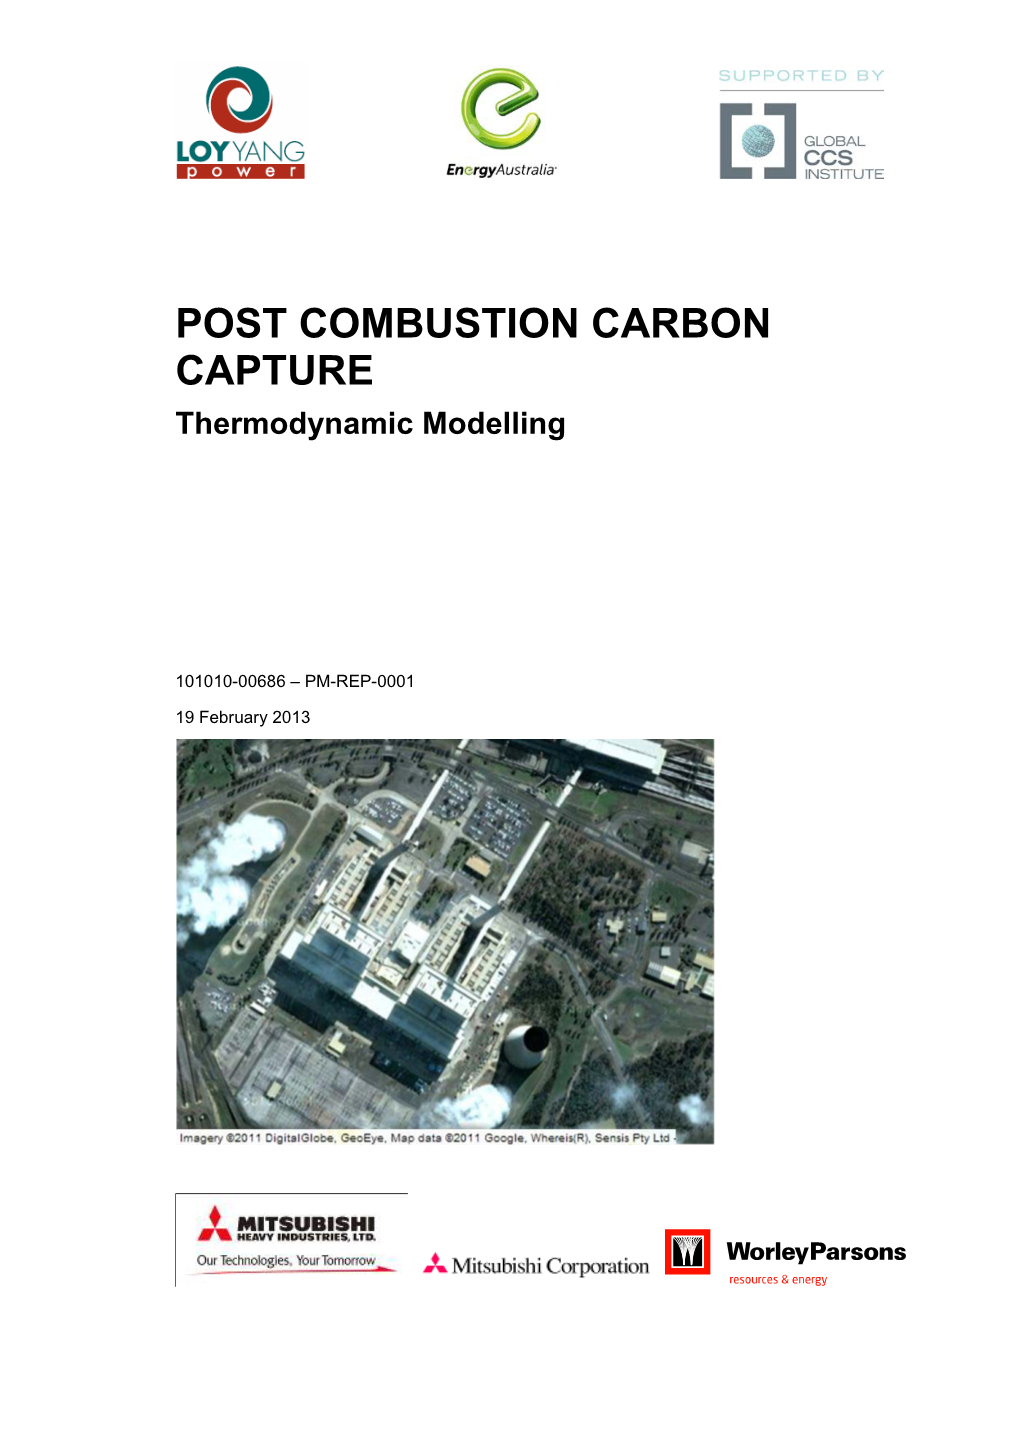 POST COMBUSTION CARBON CAPTURE Thermodynamic Modelling